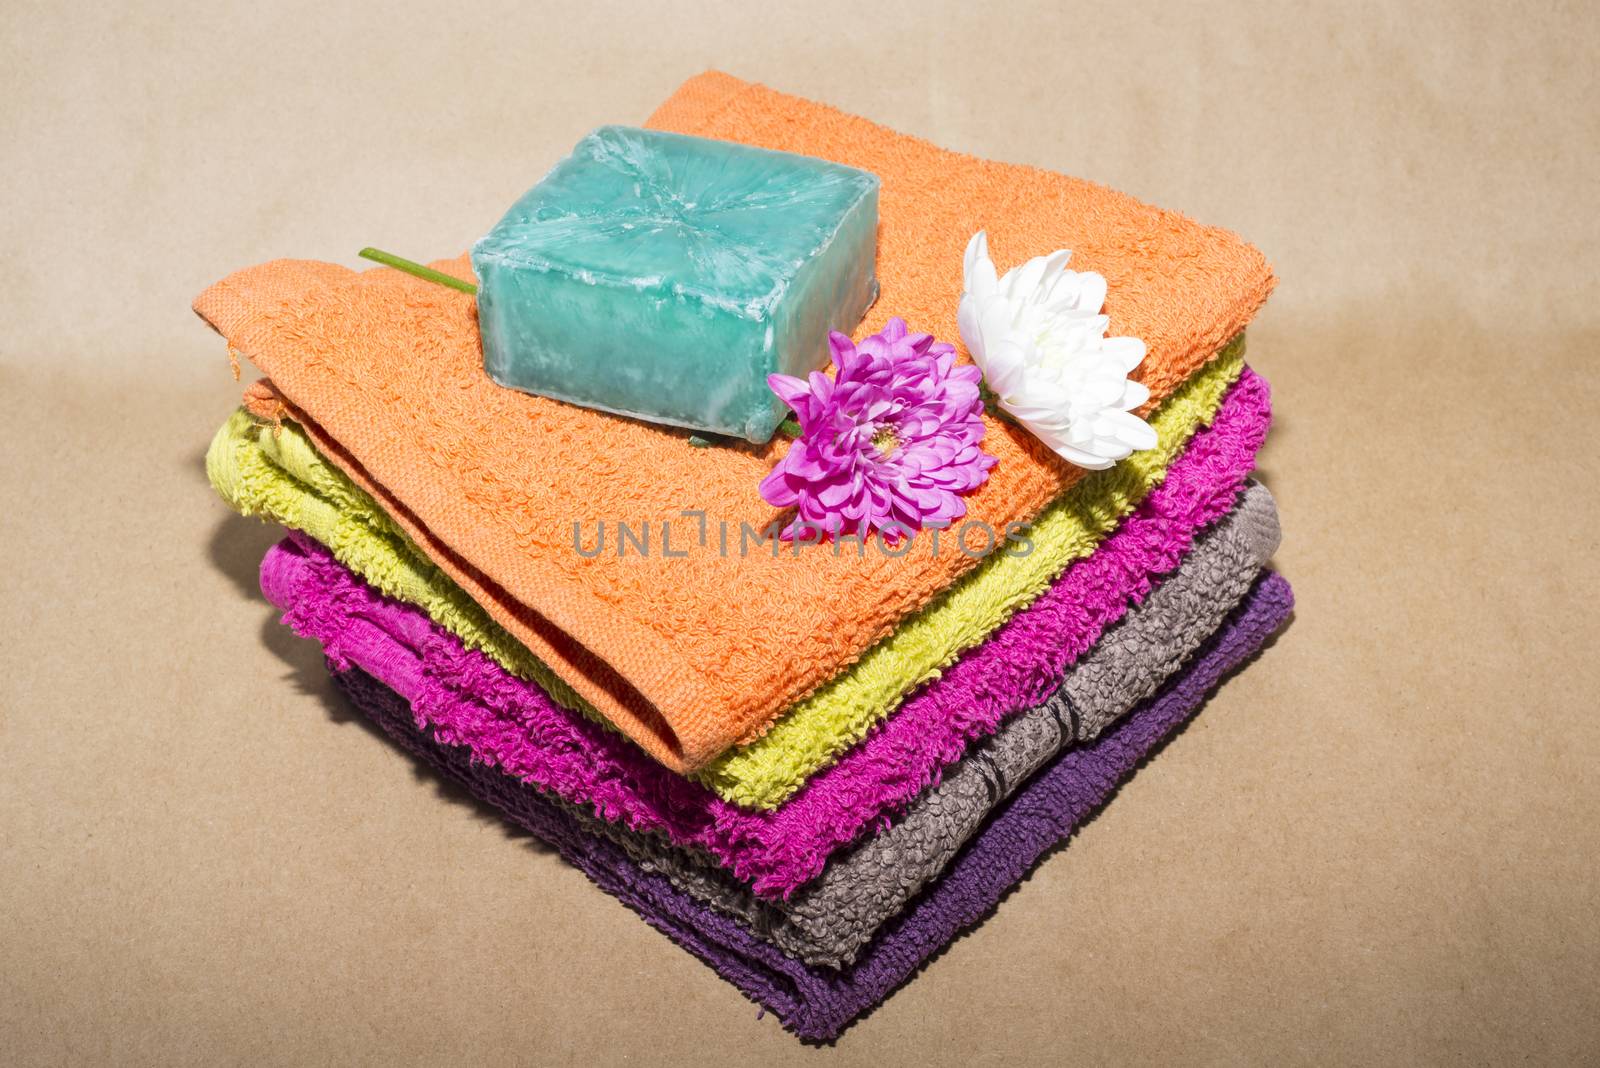 5 facecloths off various shades with flowers and soap by morrbyte